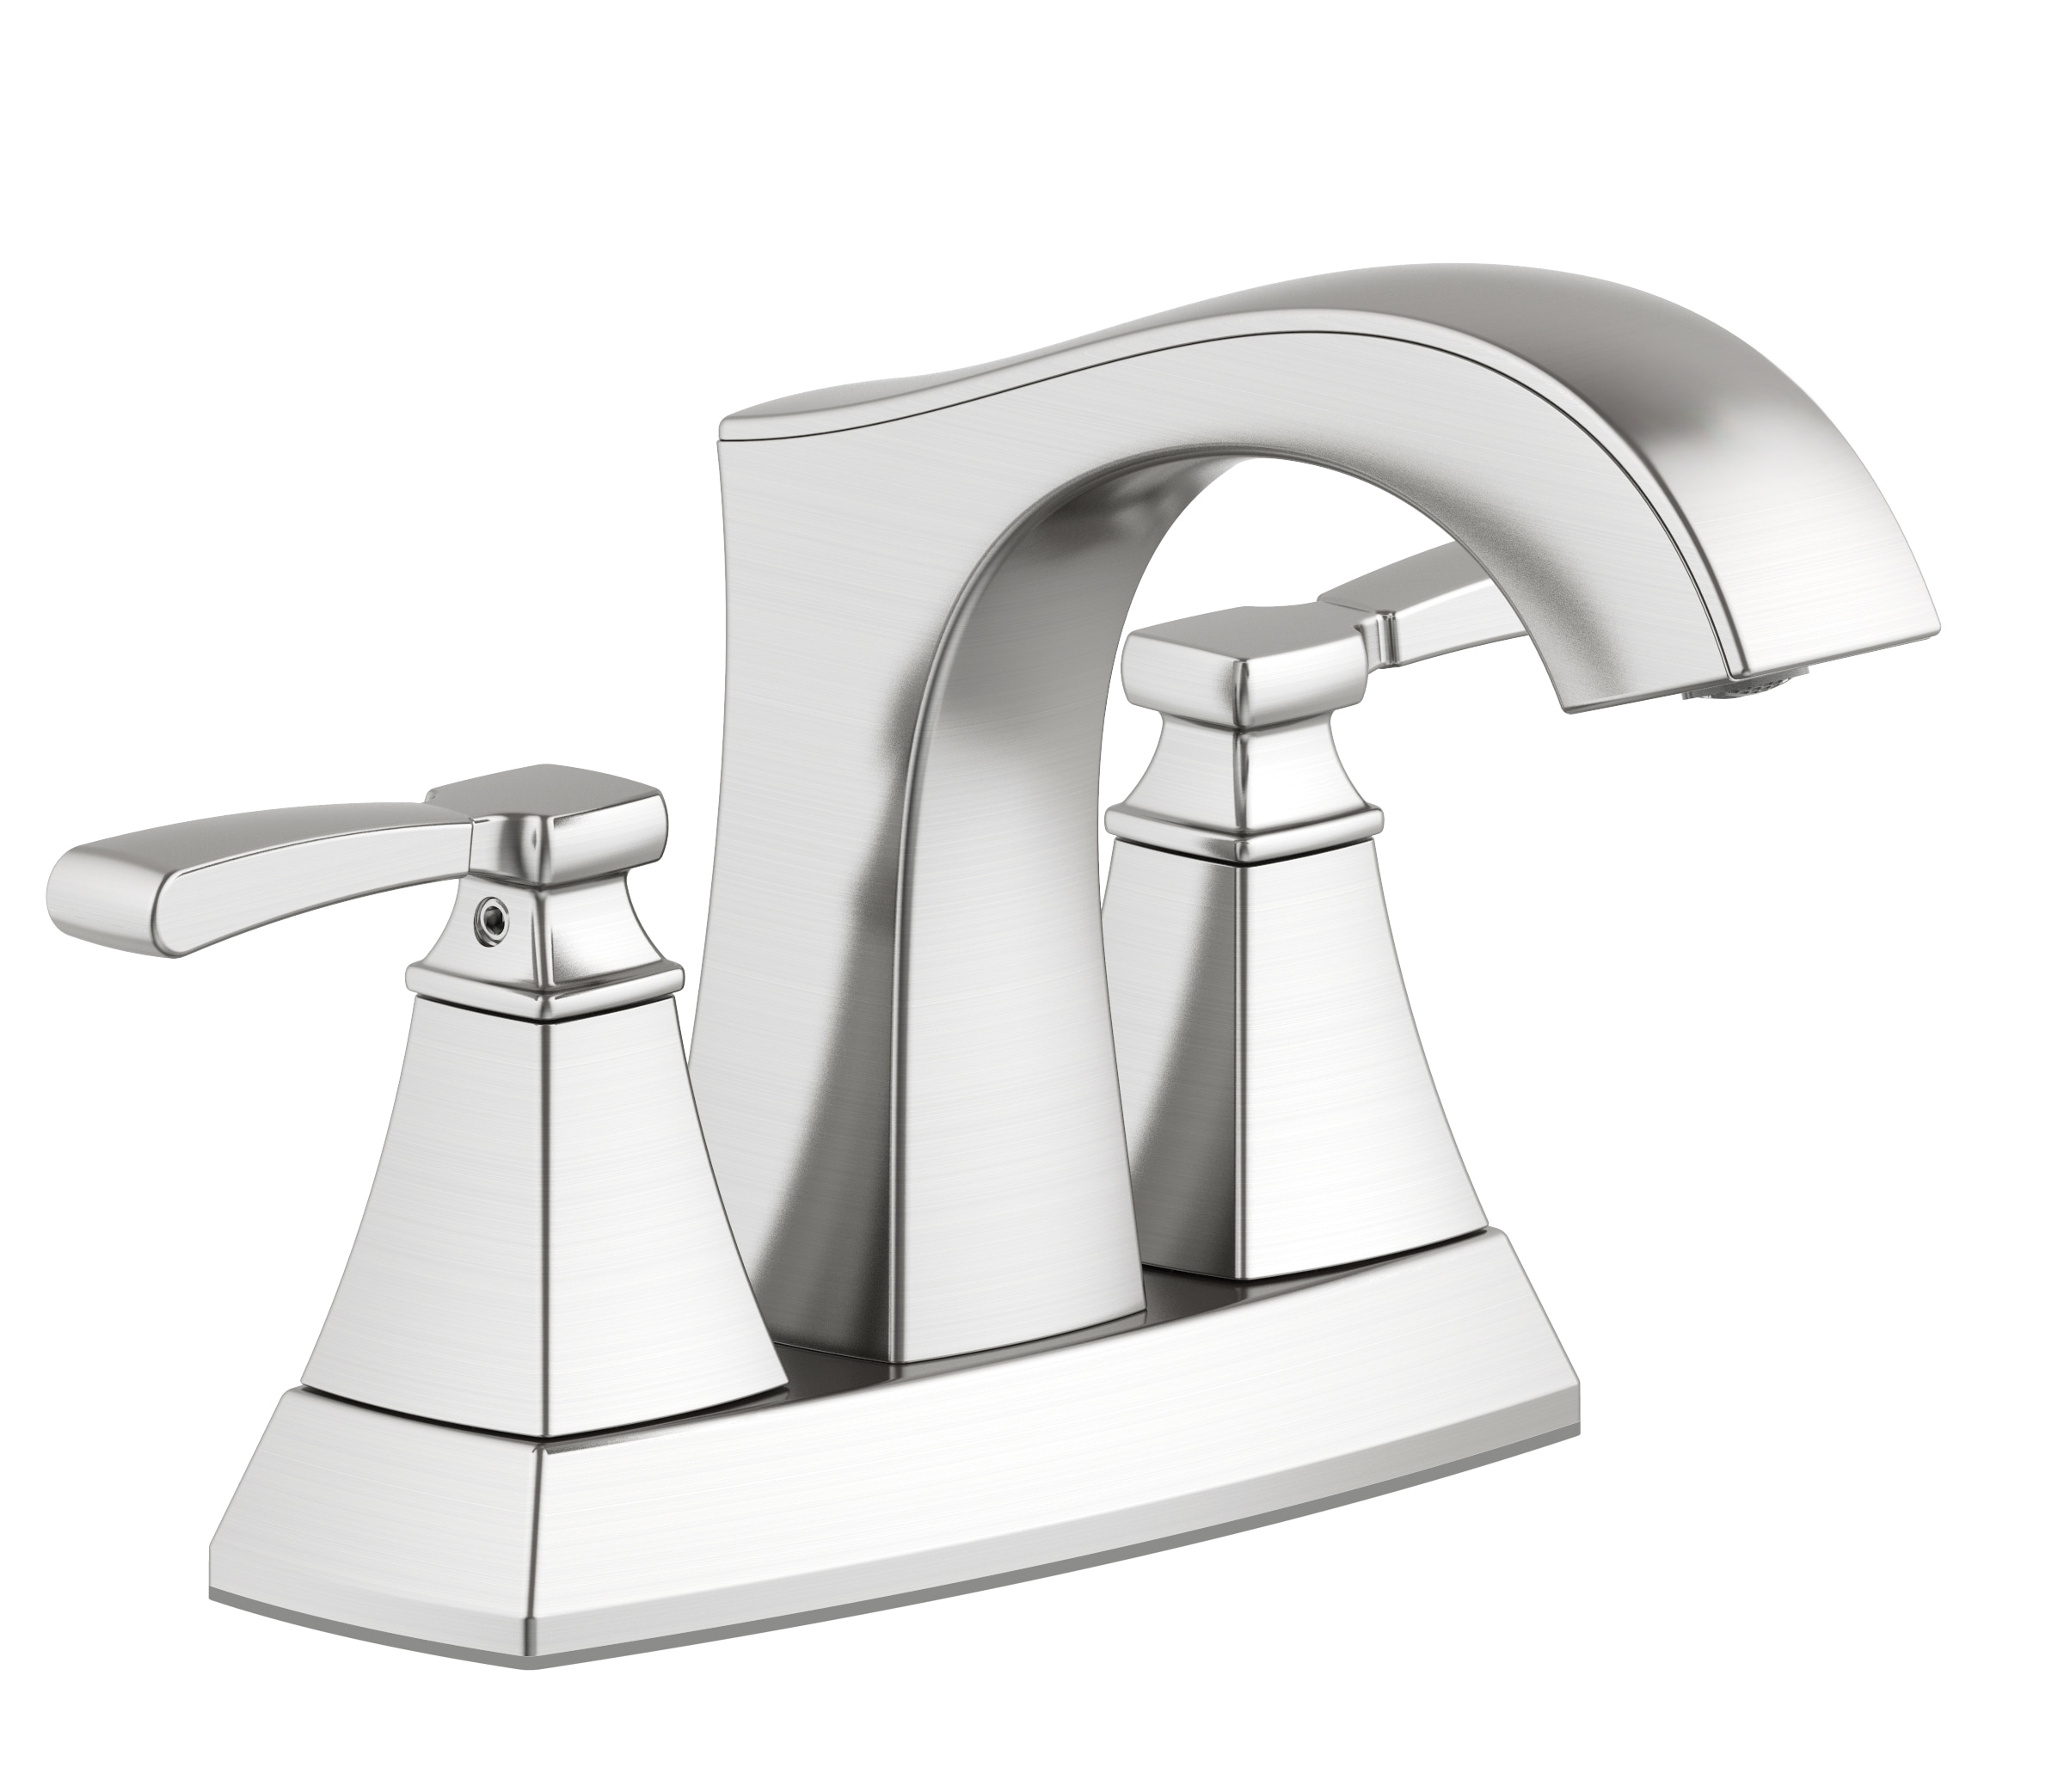 Rumson® 4-Inch Centerset 2-Handle Bathroom Faucet 1.2 gpm/4.5 L/min With  Lever